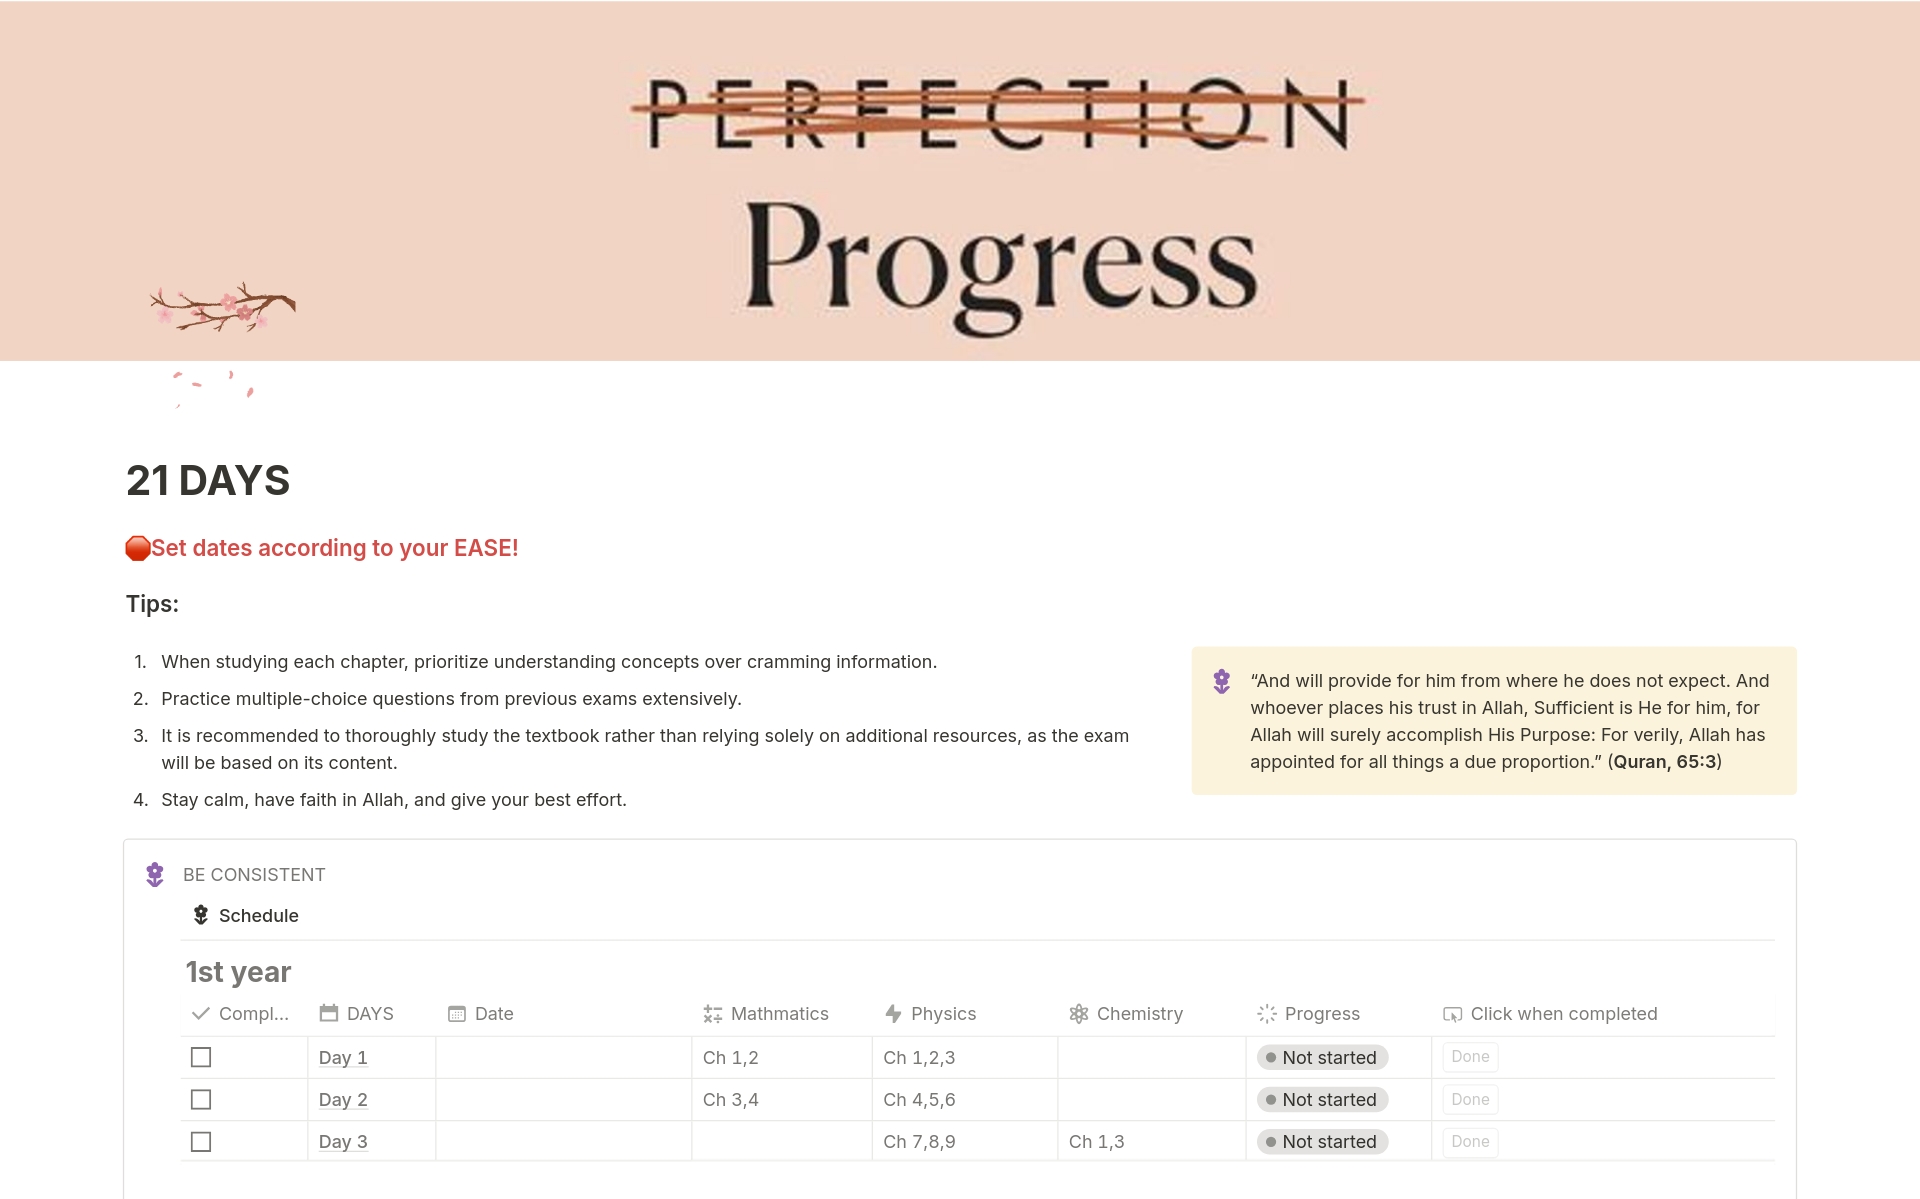 Introducing the premier tool for enhancing your preparation for entry tests: the Entry Test Preparation Notion Template! This meticulously crafted template serves as your comprehensive roadmap, offering customized study schedules for three distinct timeframes—21 days, 14 days, an